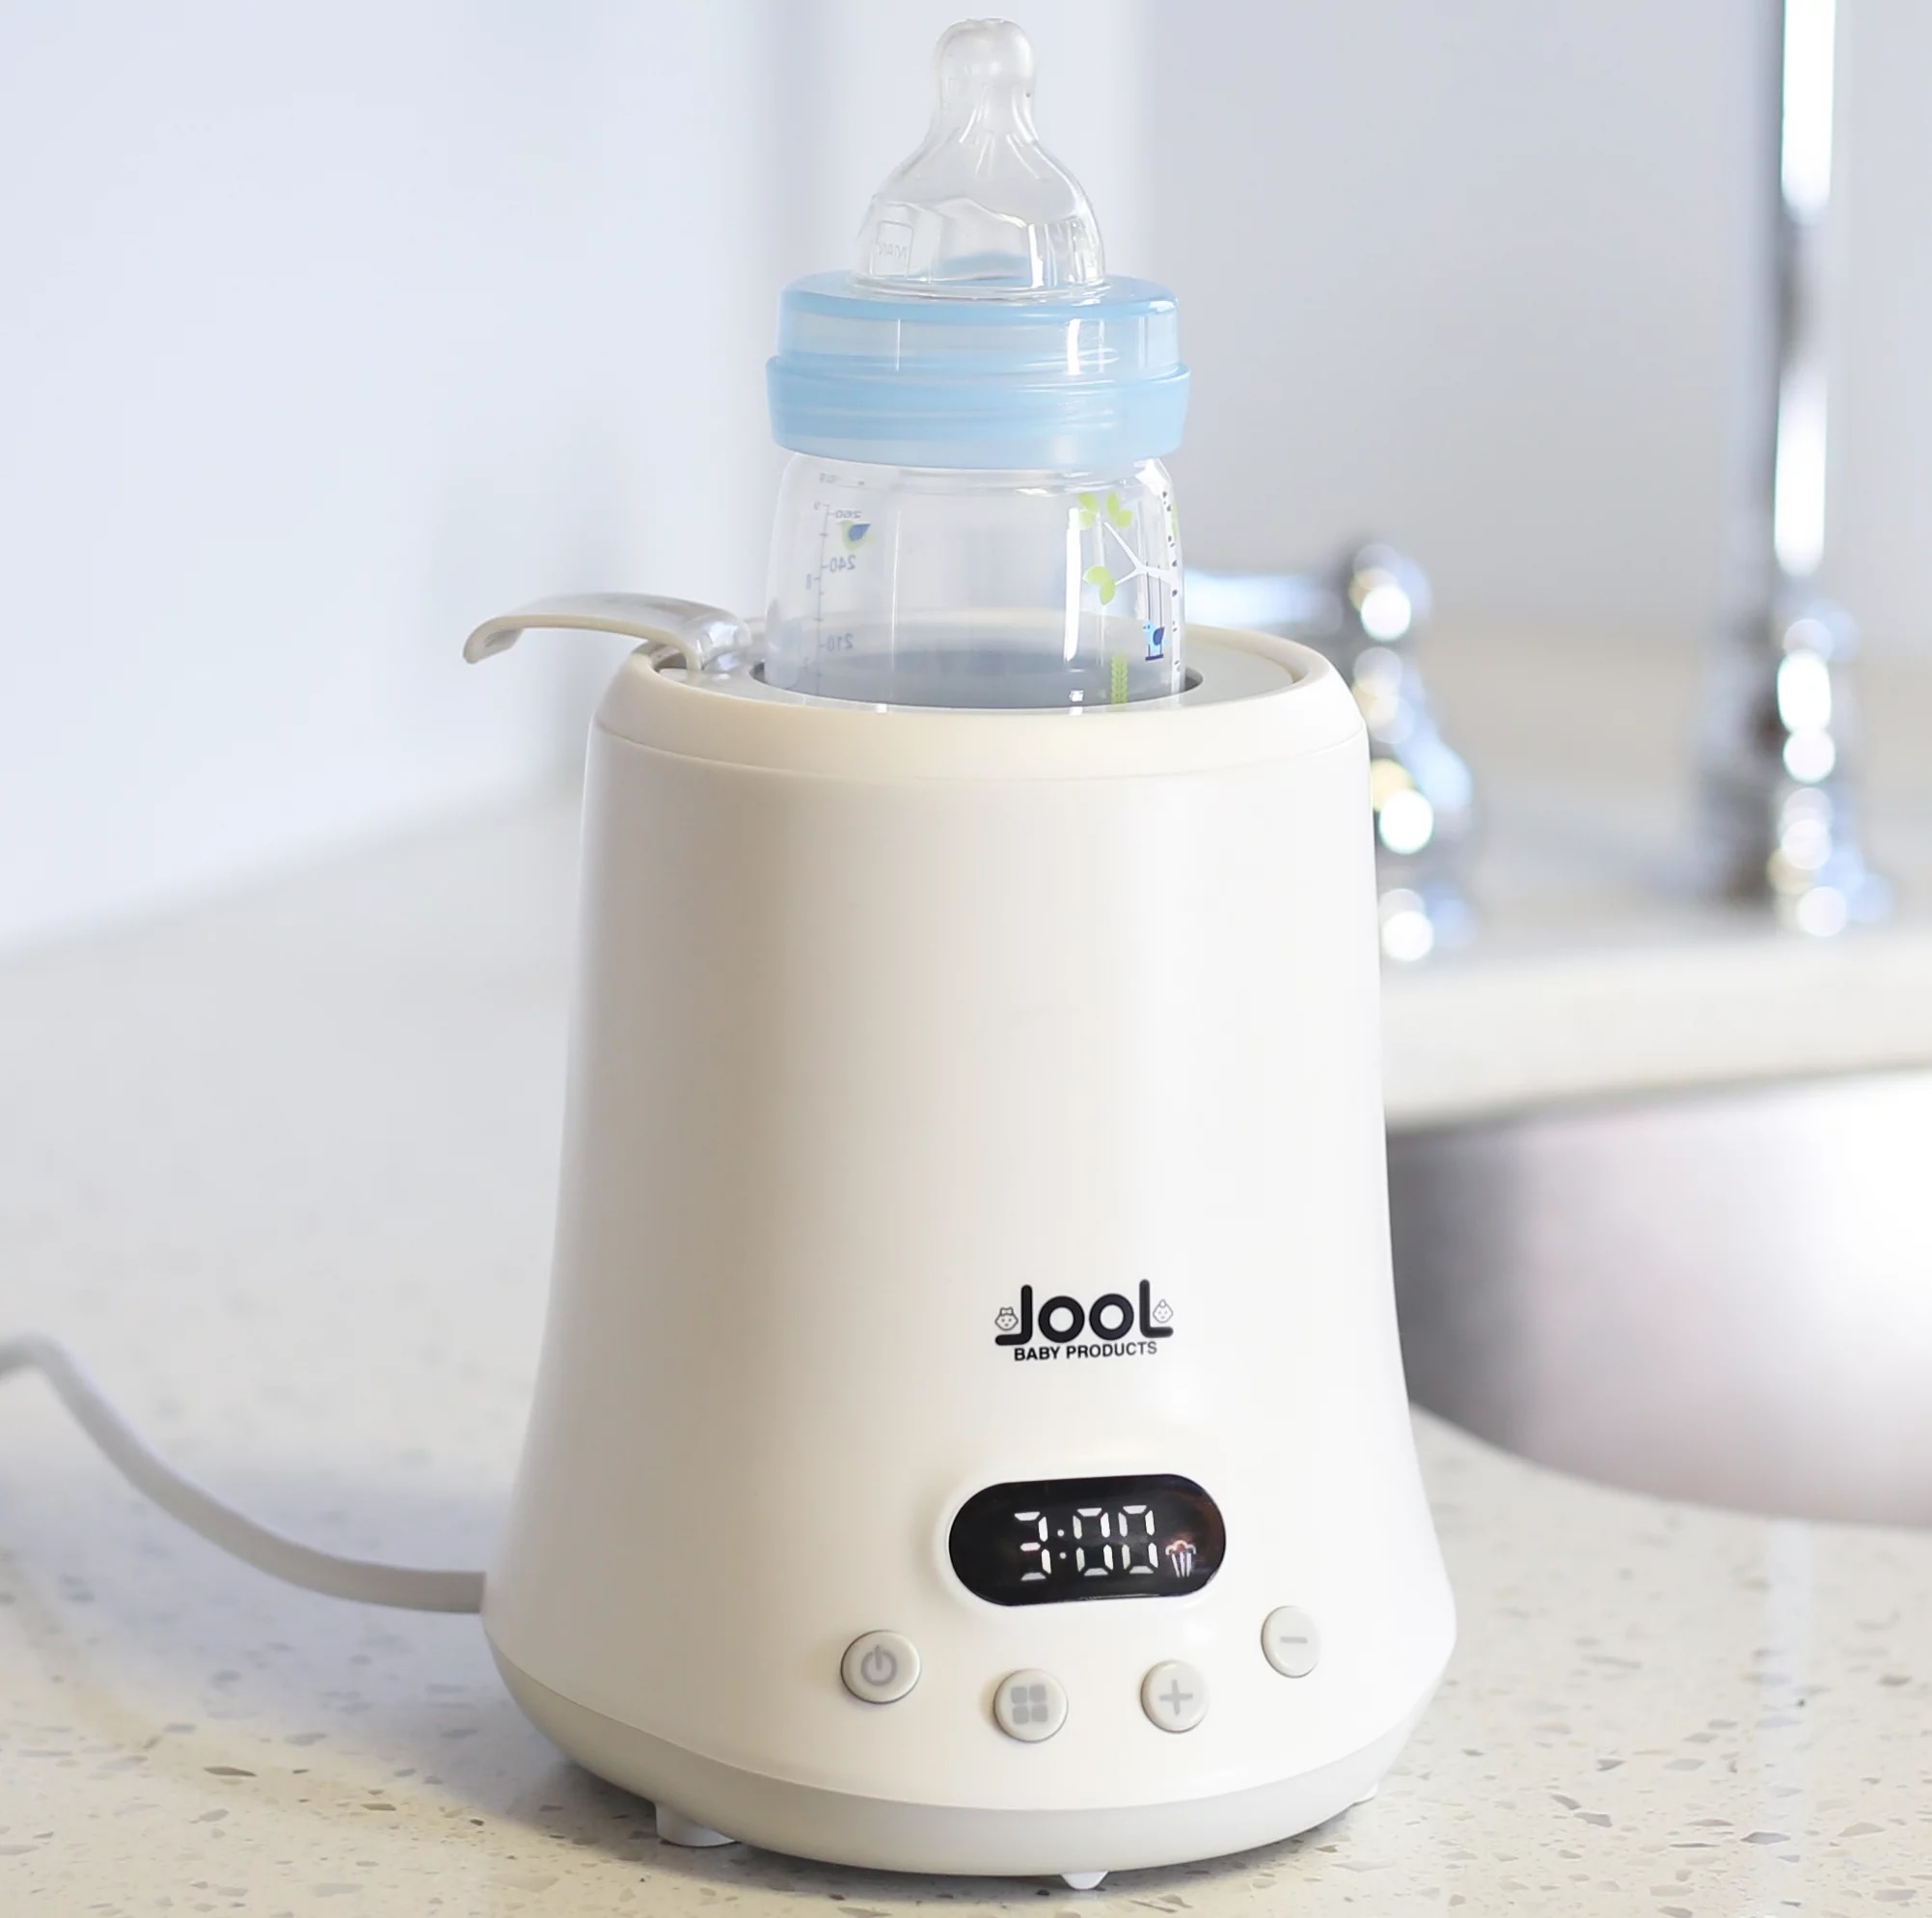 Bottle Warmer Review: The Best Options for Efficient Heating